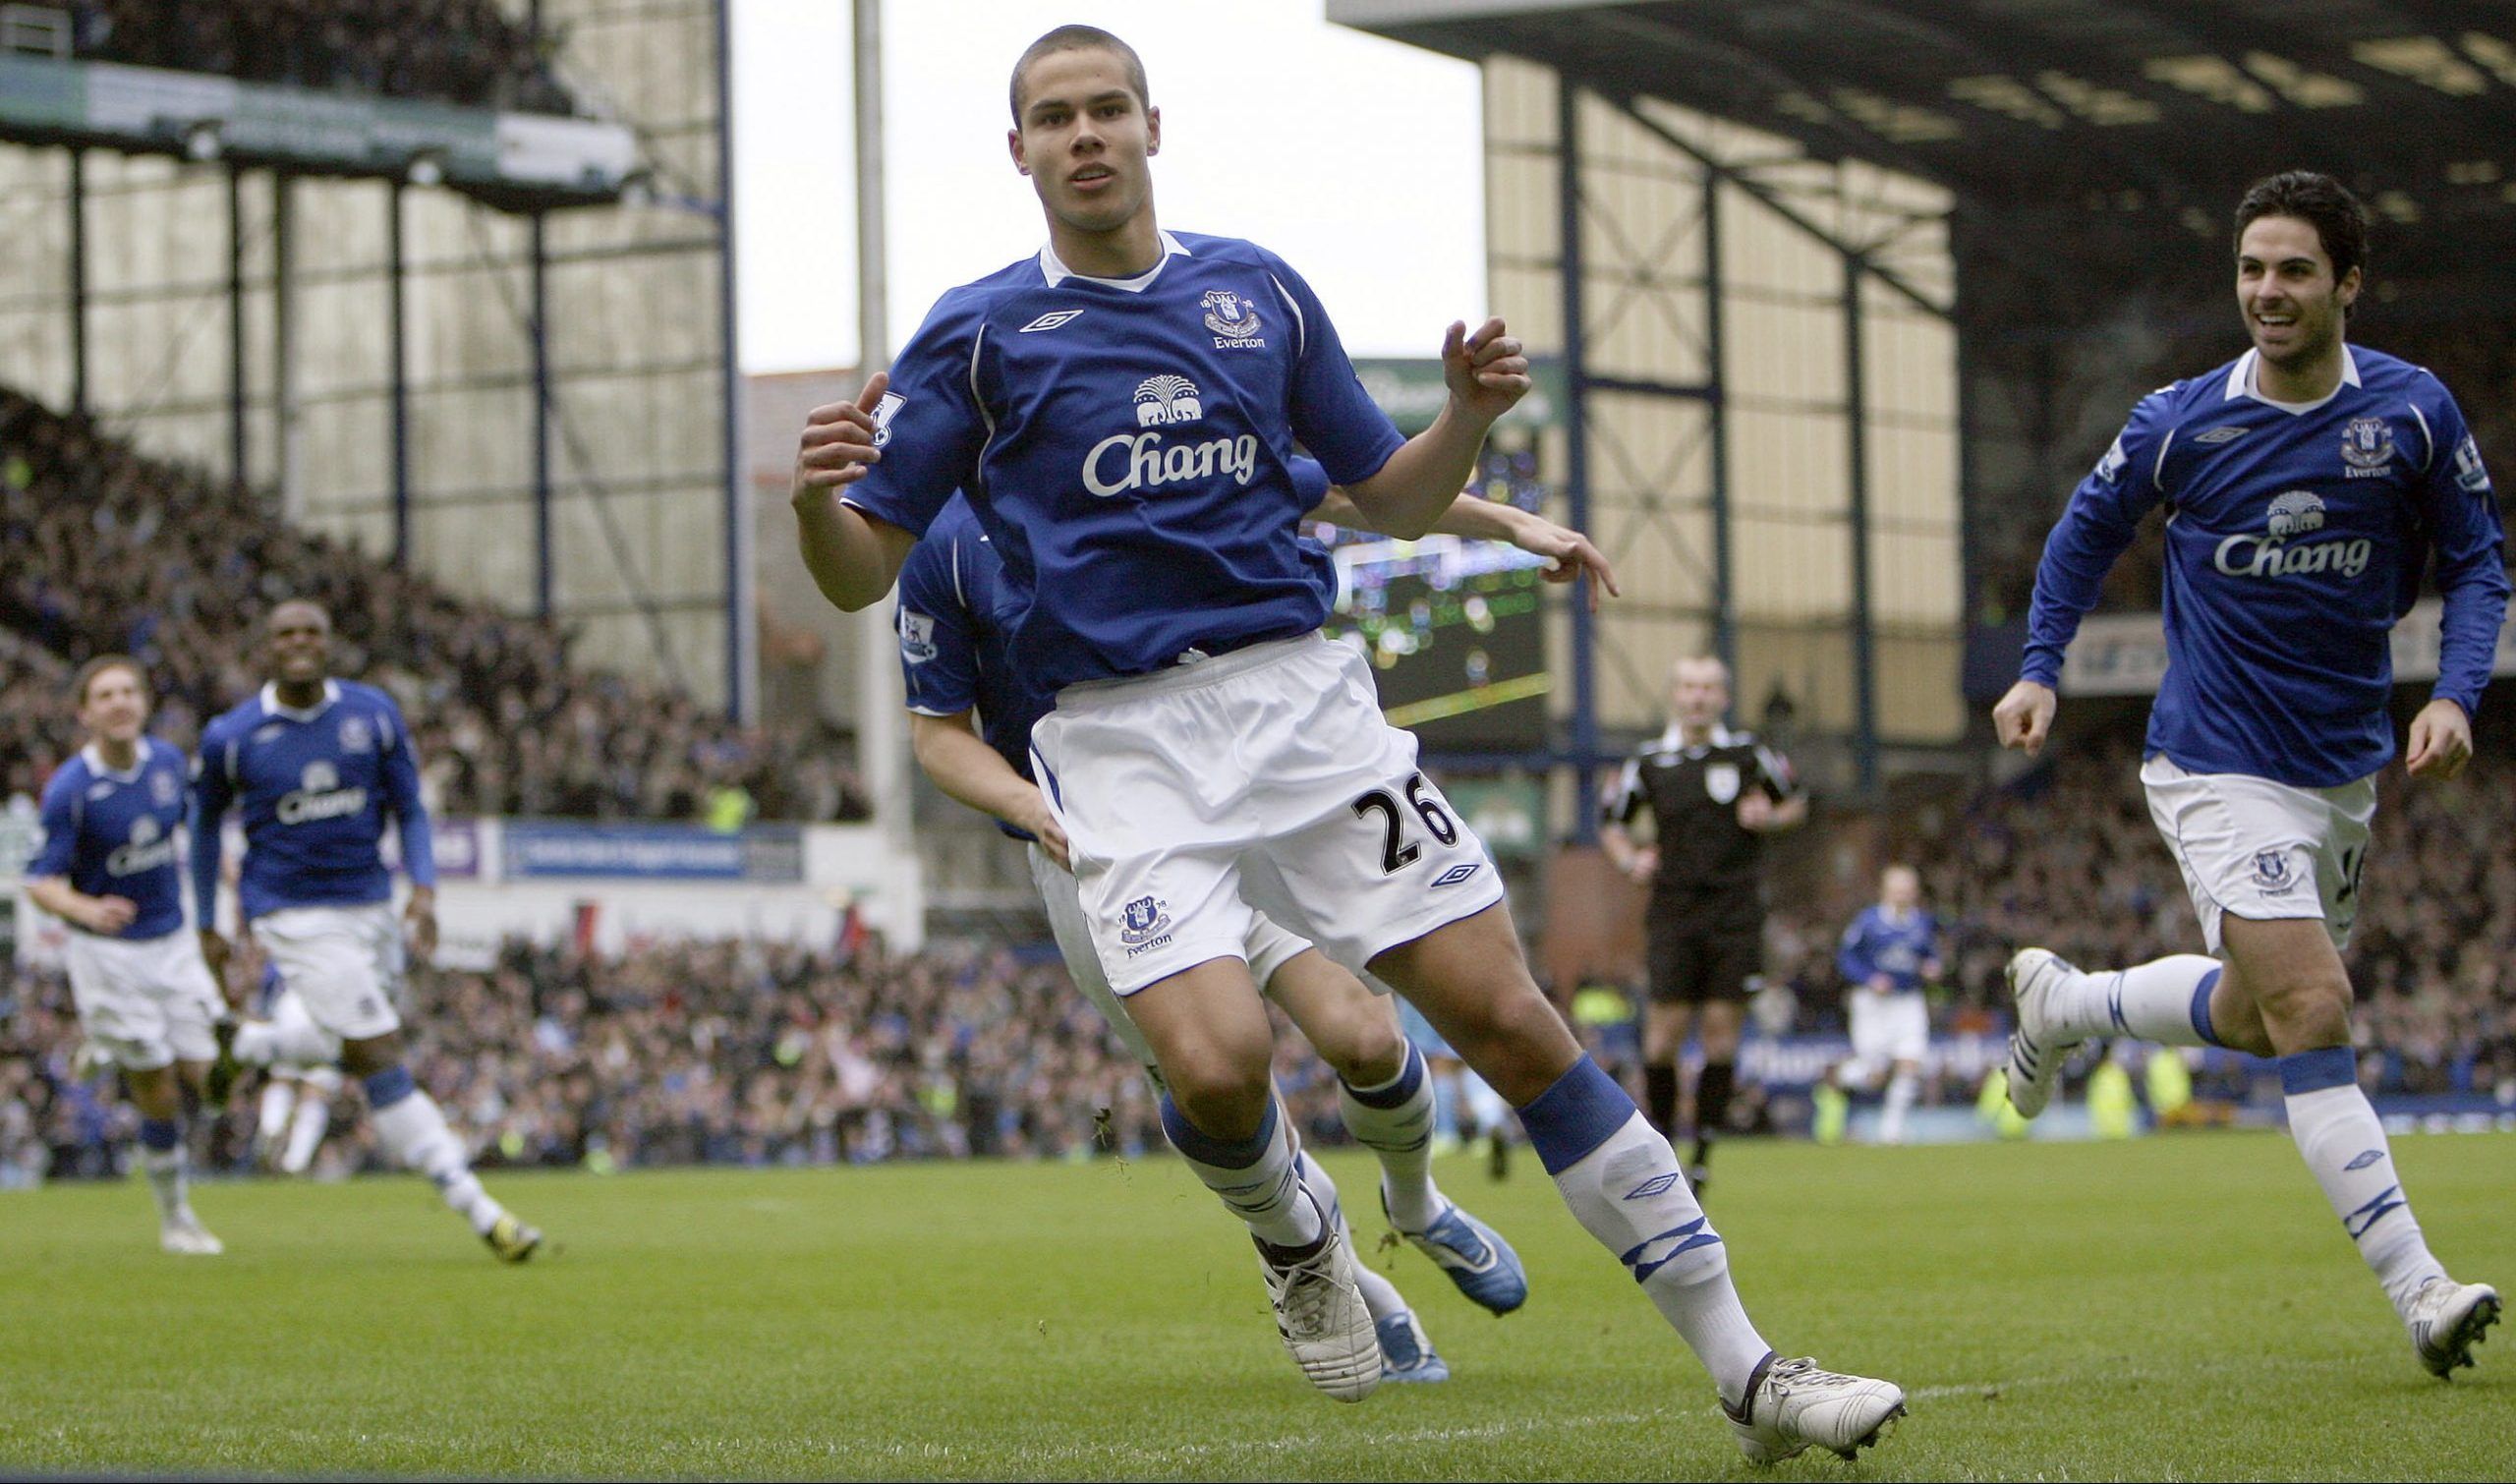 Football - Everton v Aston Villa FA Cup Fifth Round - Goodison Park - 15/2/09 
Jack Rodwell celebrates scoring the first goal for Everton 
Mandatory Credit: Action Images / Carl Recine 
Livepic